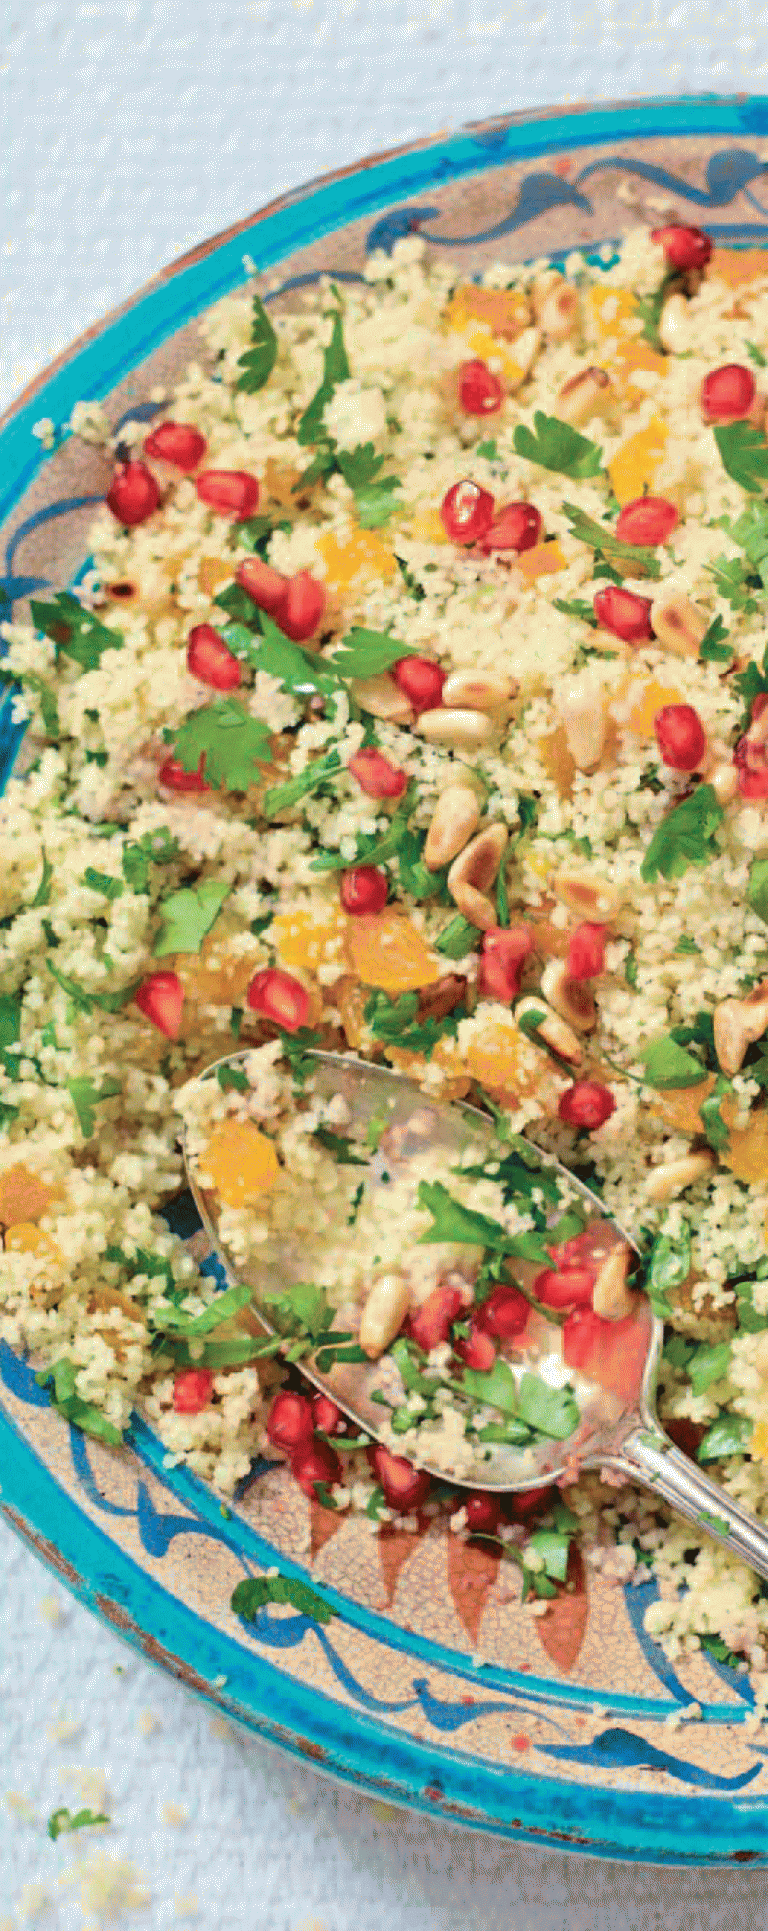 How to Make Jeweled couscous in a jiffy - Healthy Recipe